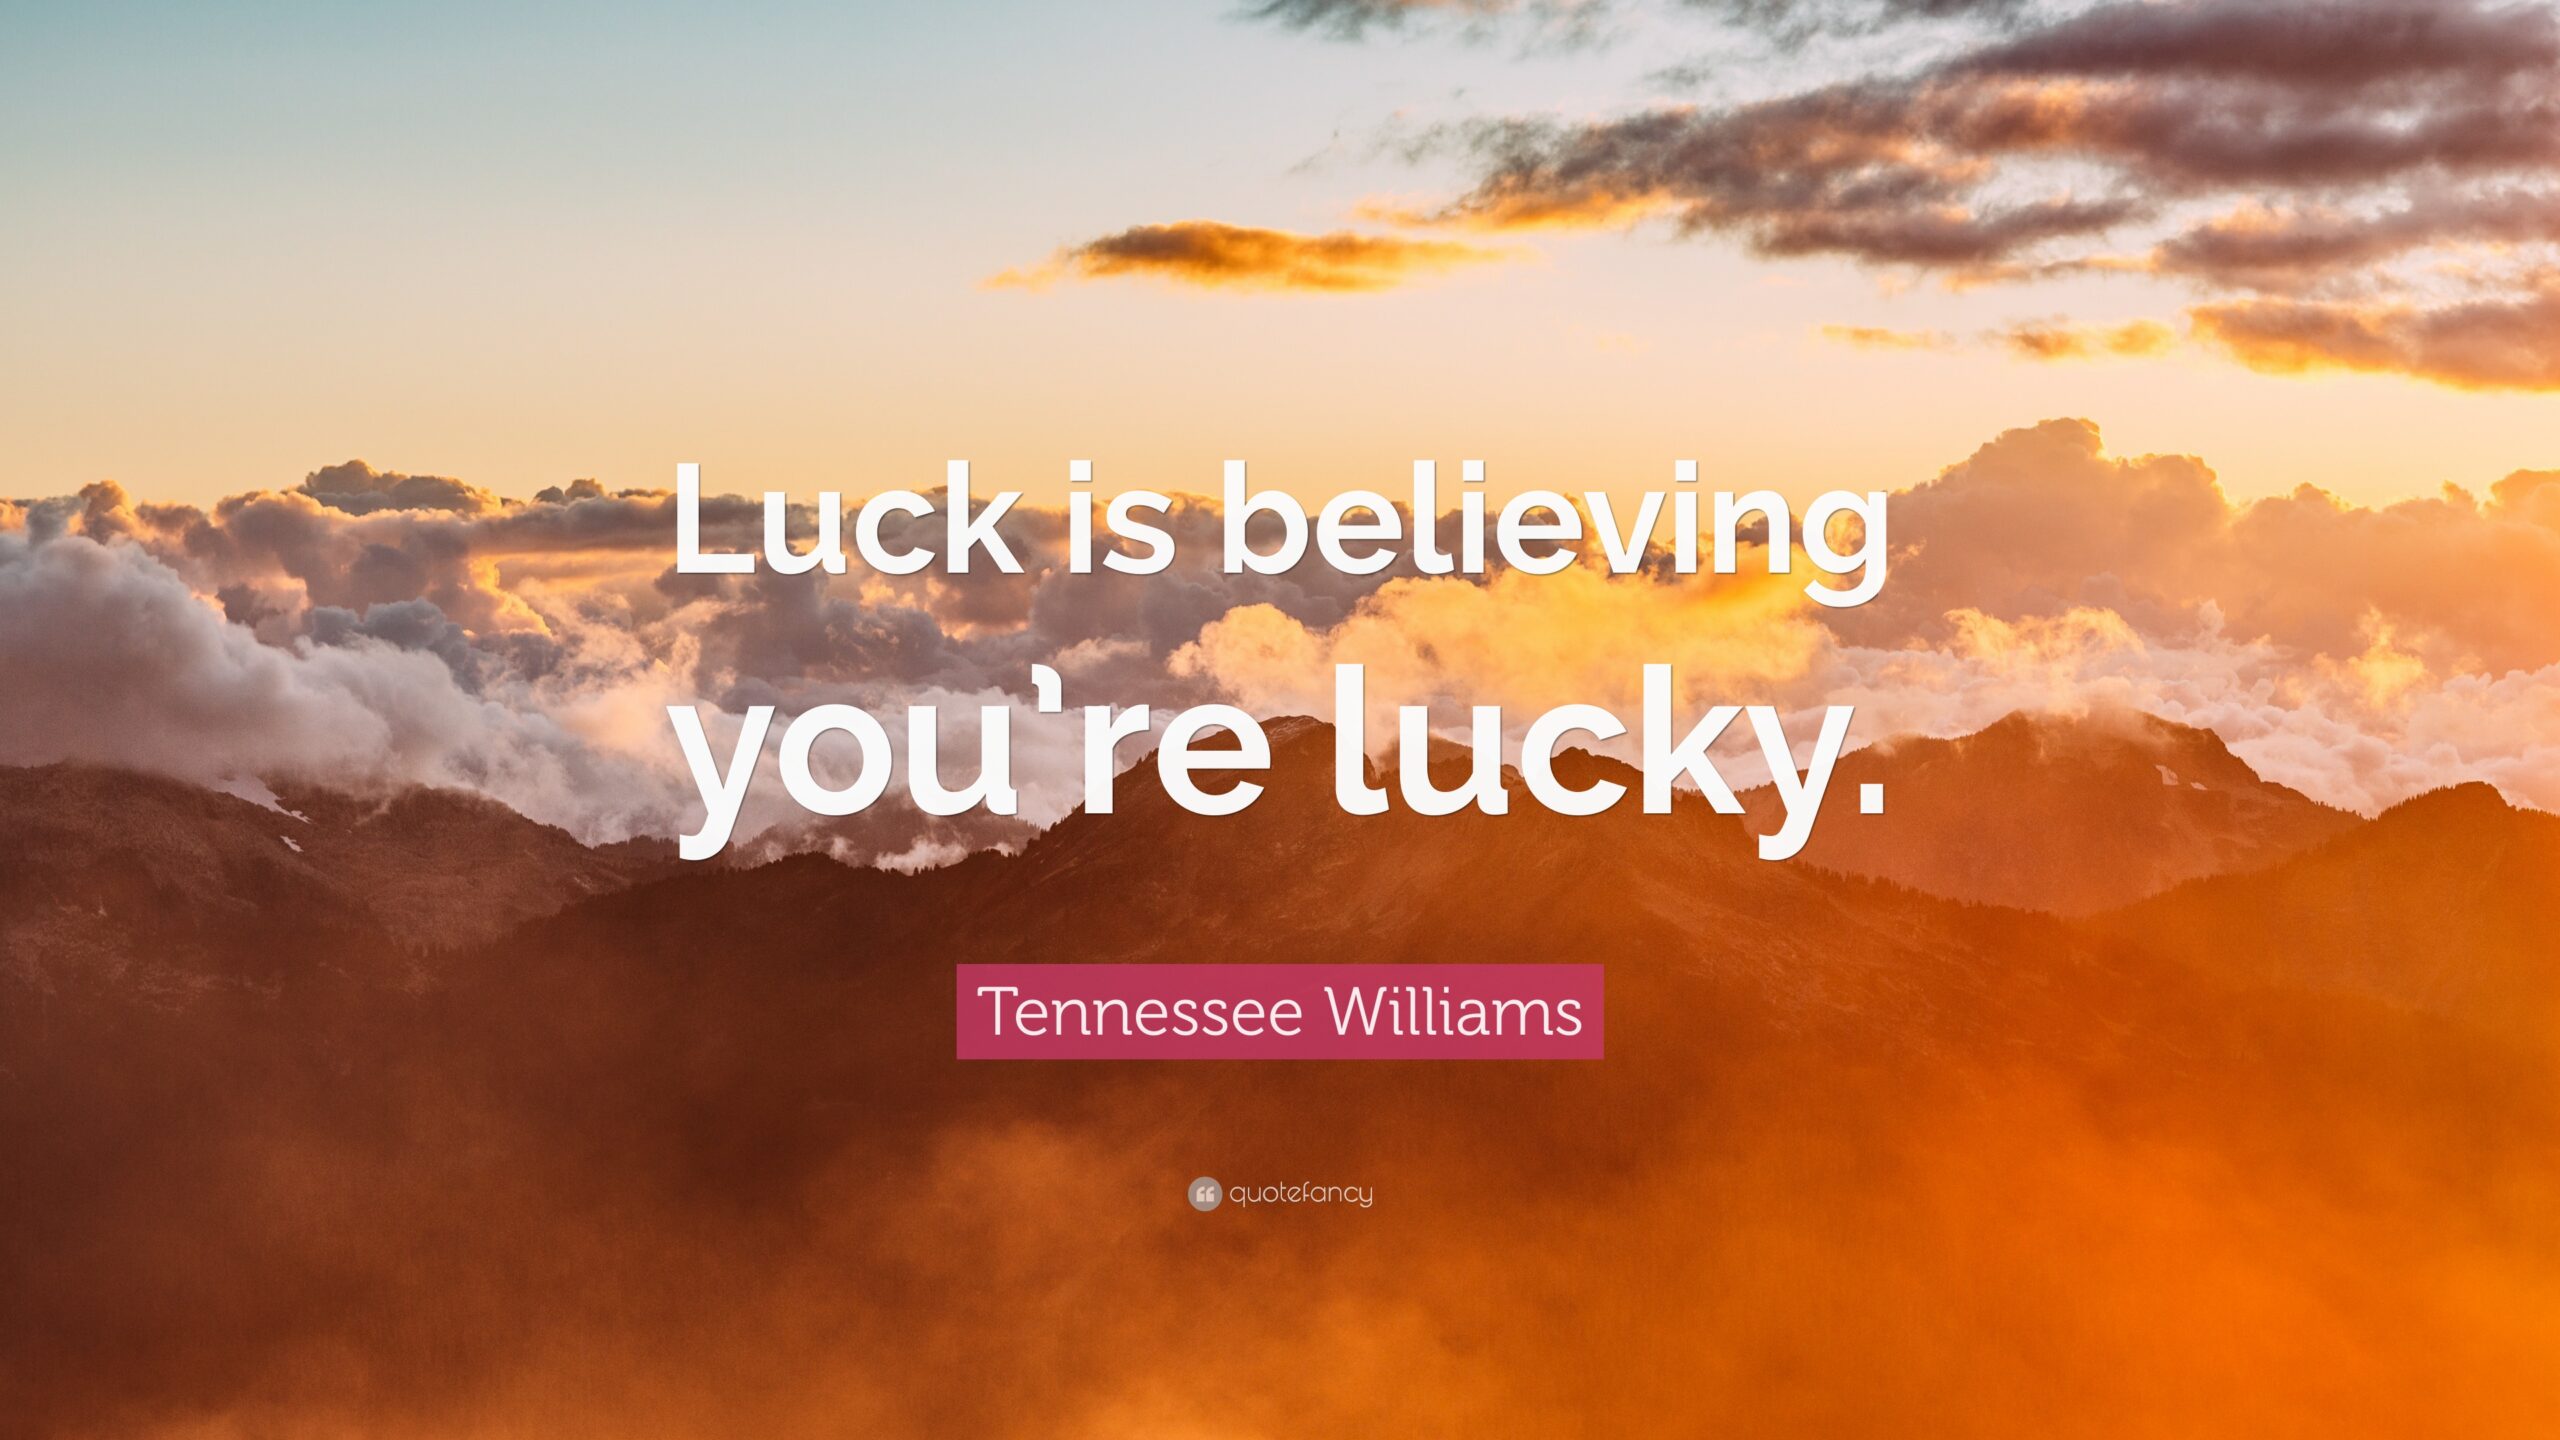 Tennessee Williams Quote “Luck is believing you’re lucky”